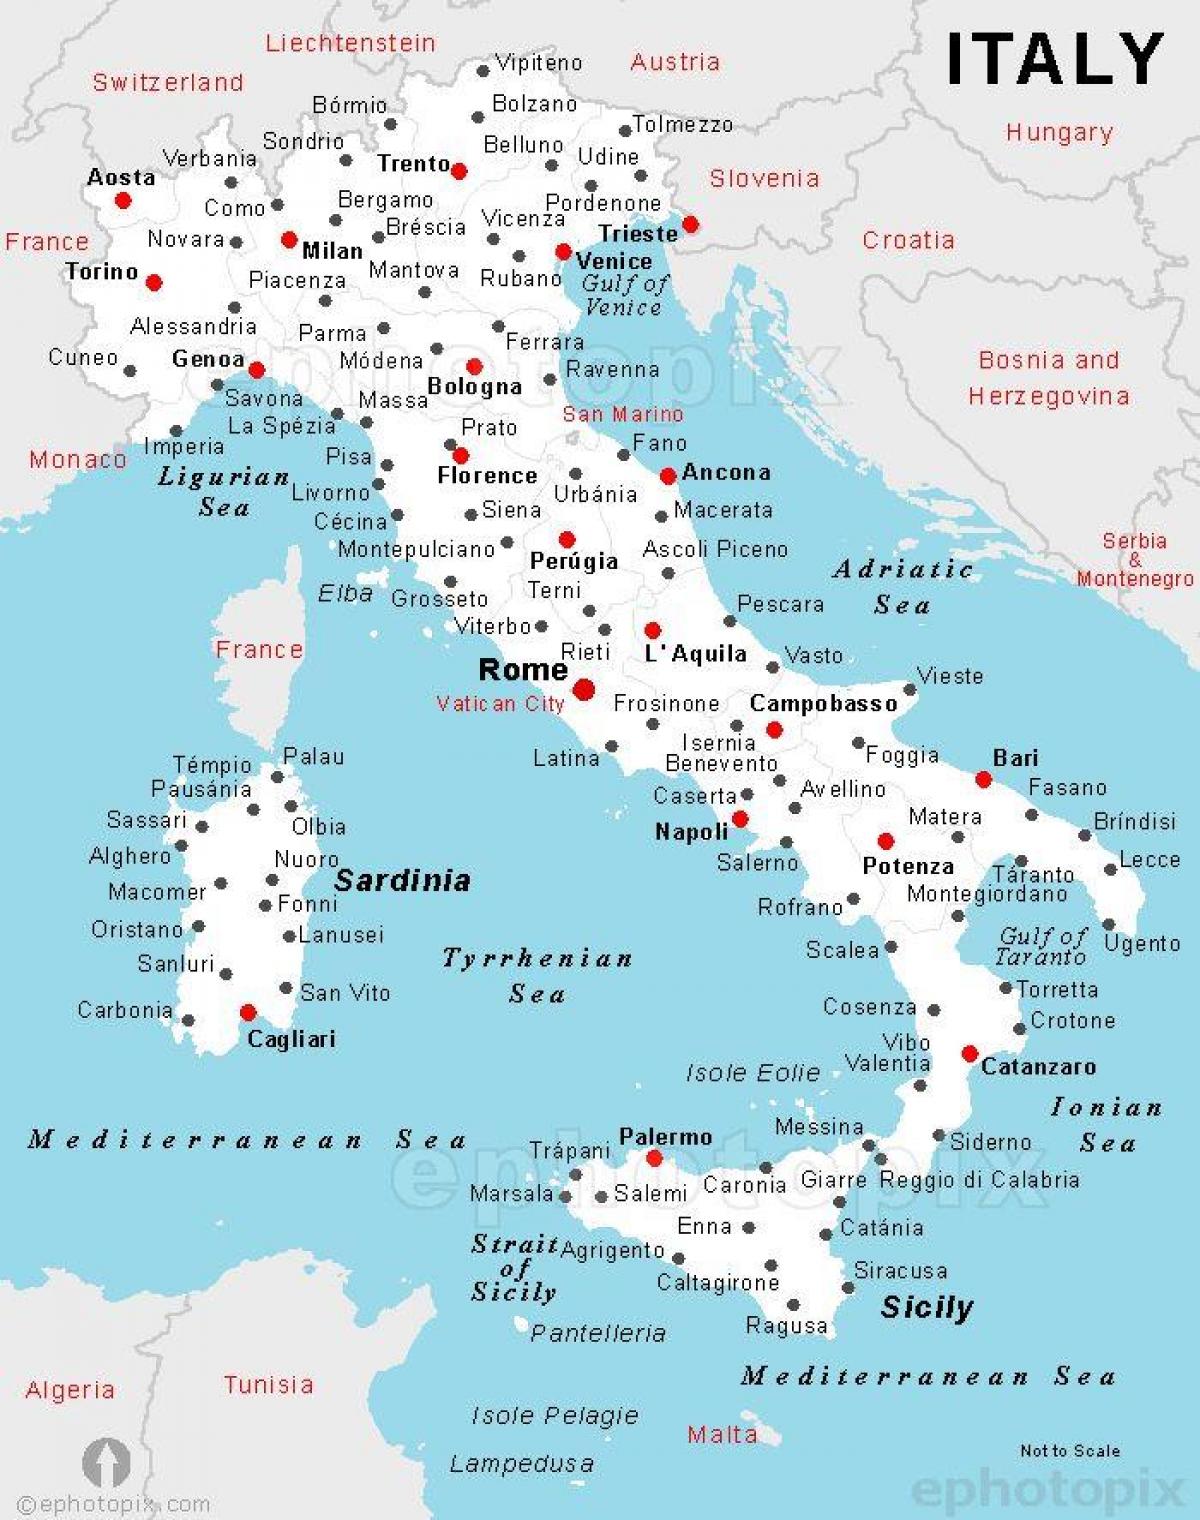 Italy city map Map of Italy with city names (Southern Europe Europe)